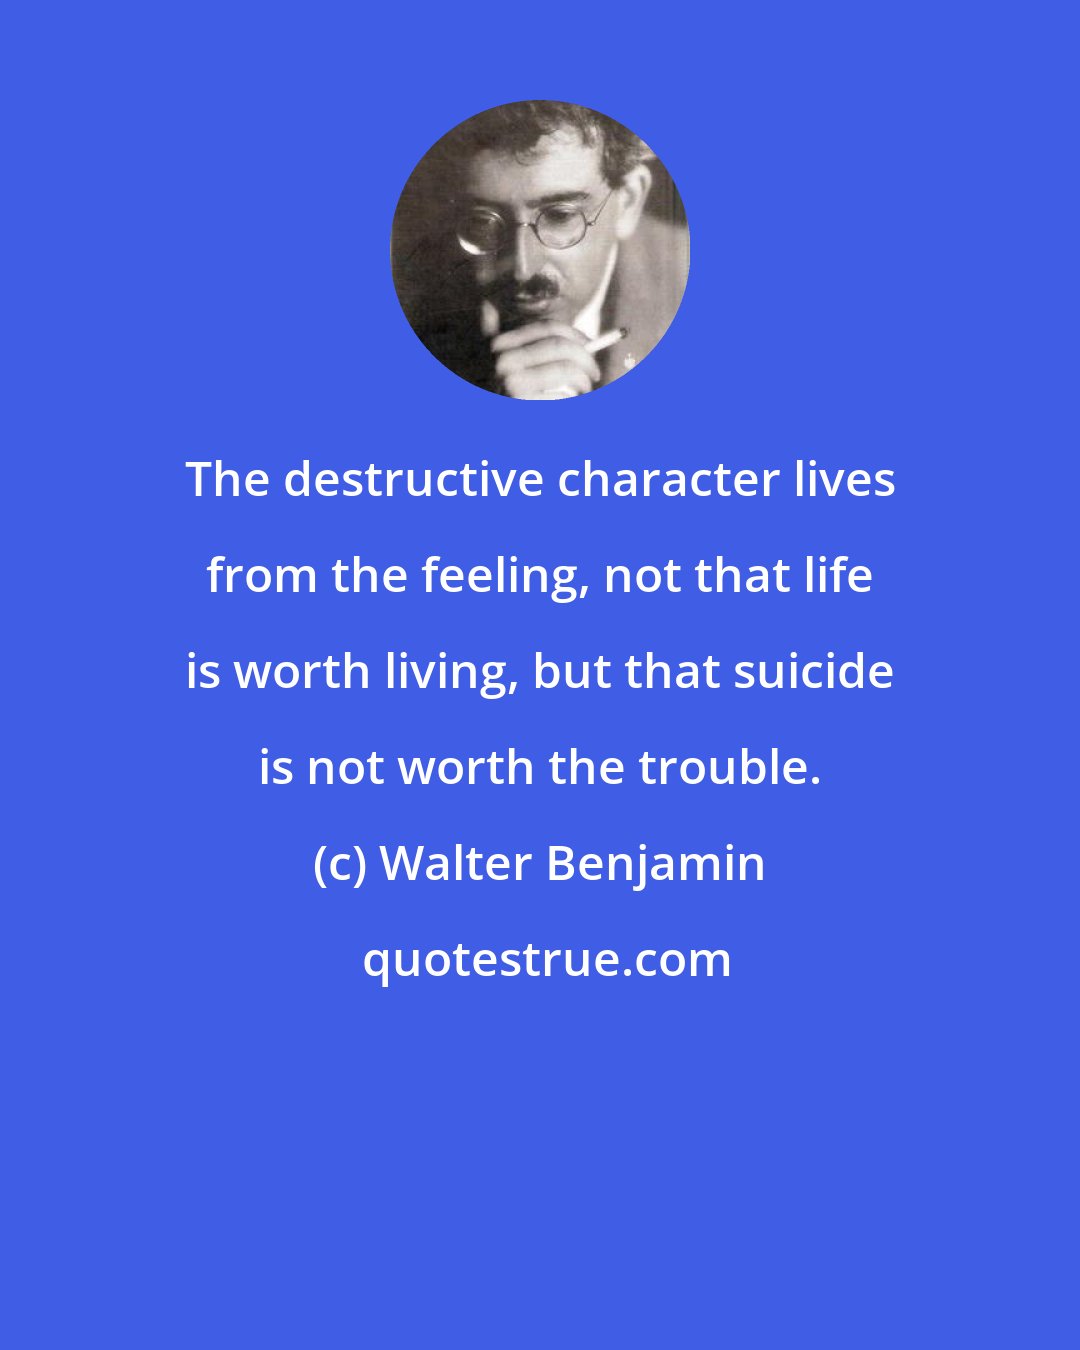 Walter Benjamin: The destructive character lives from the feeling, not that life is worth living, but that suicide is not worth the trouble.